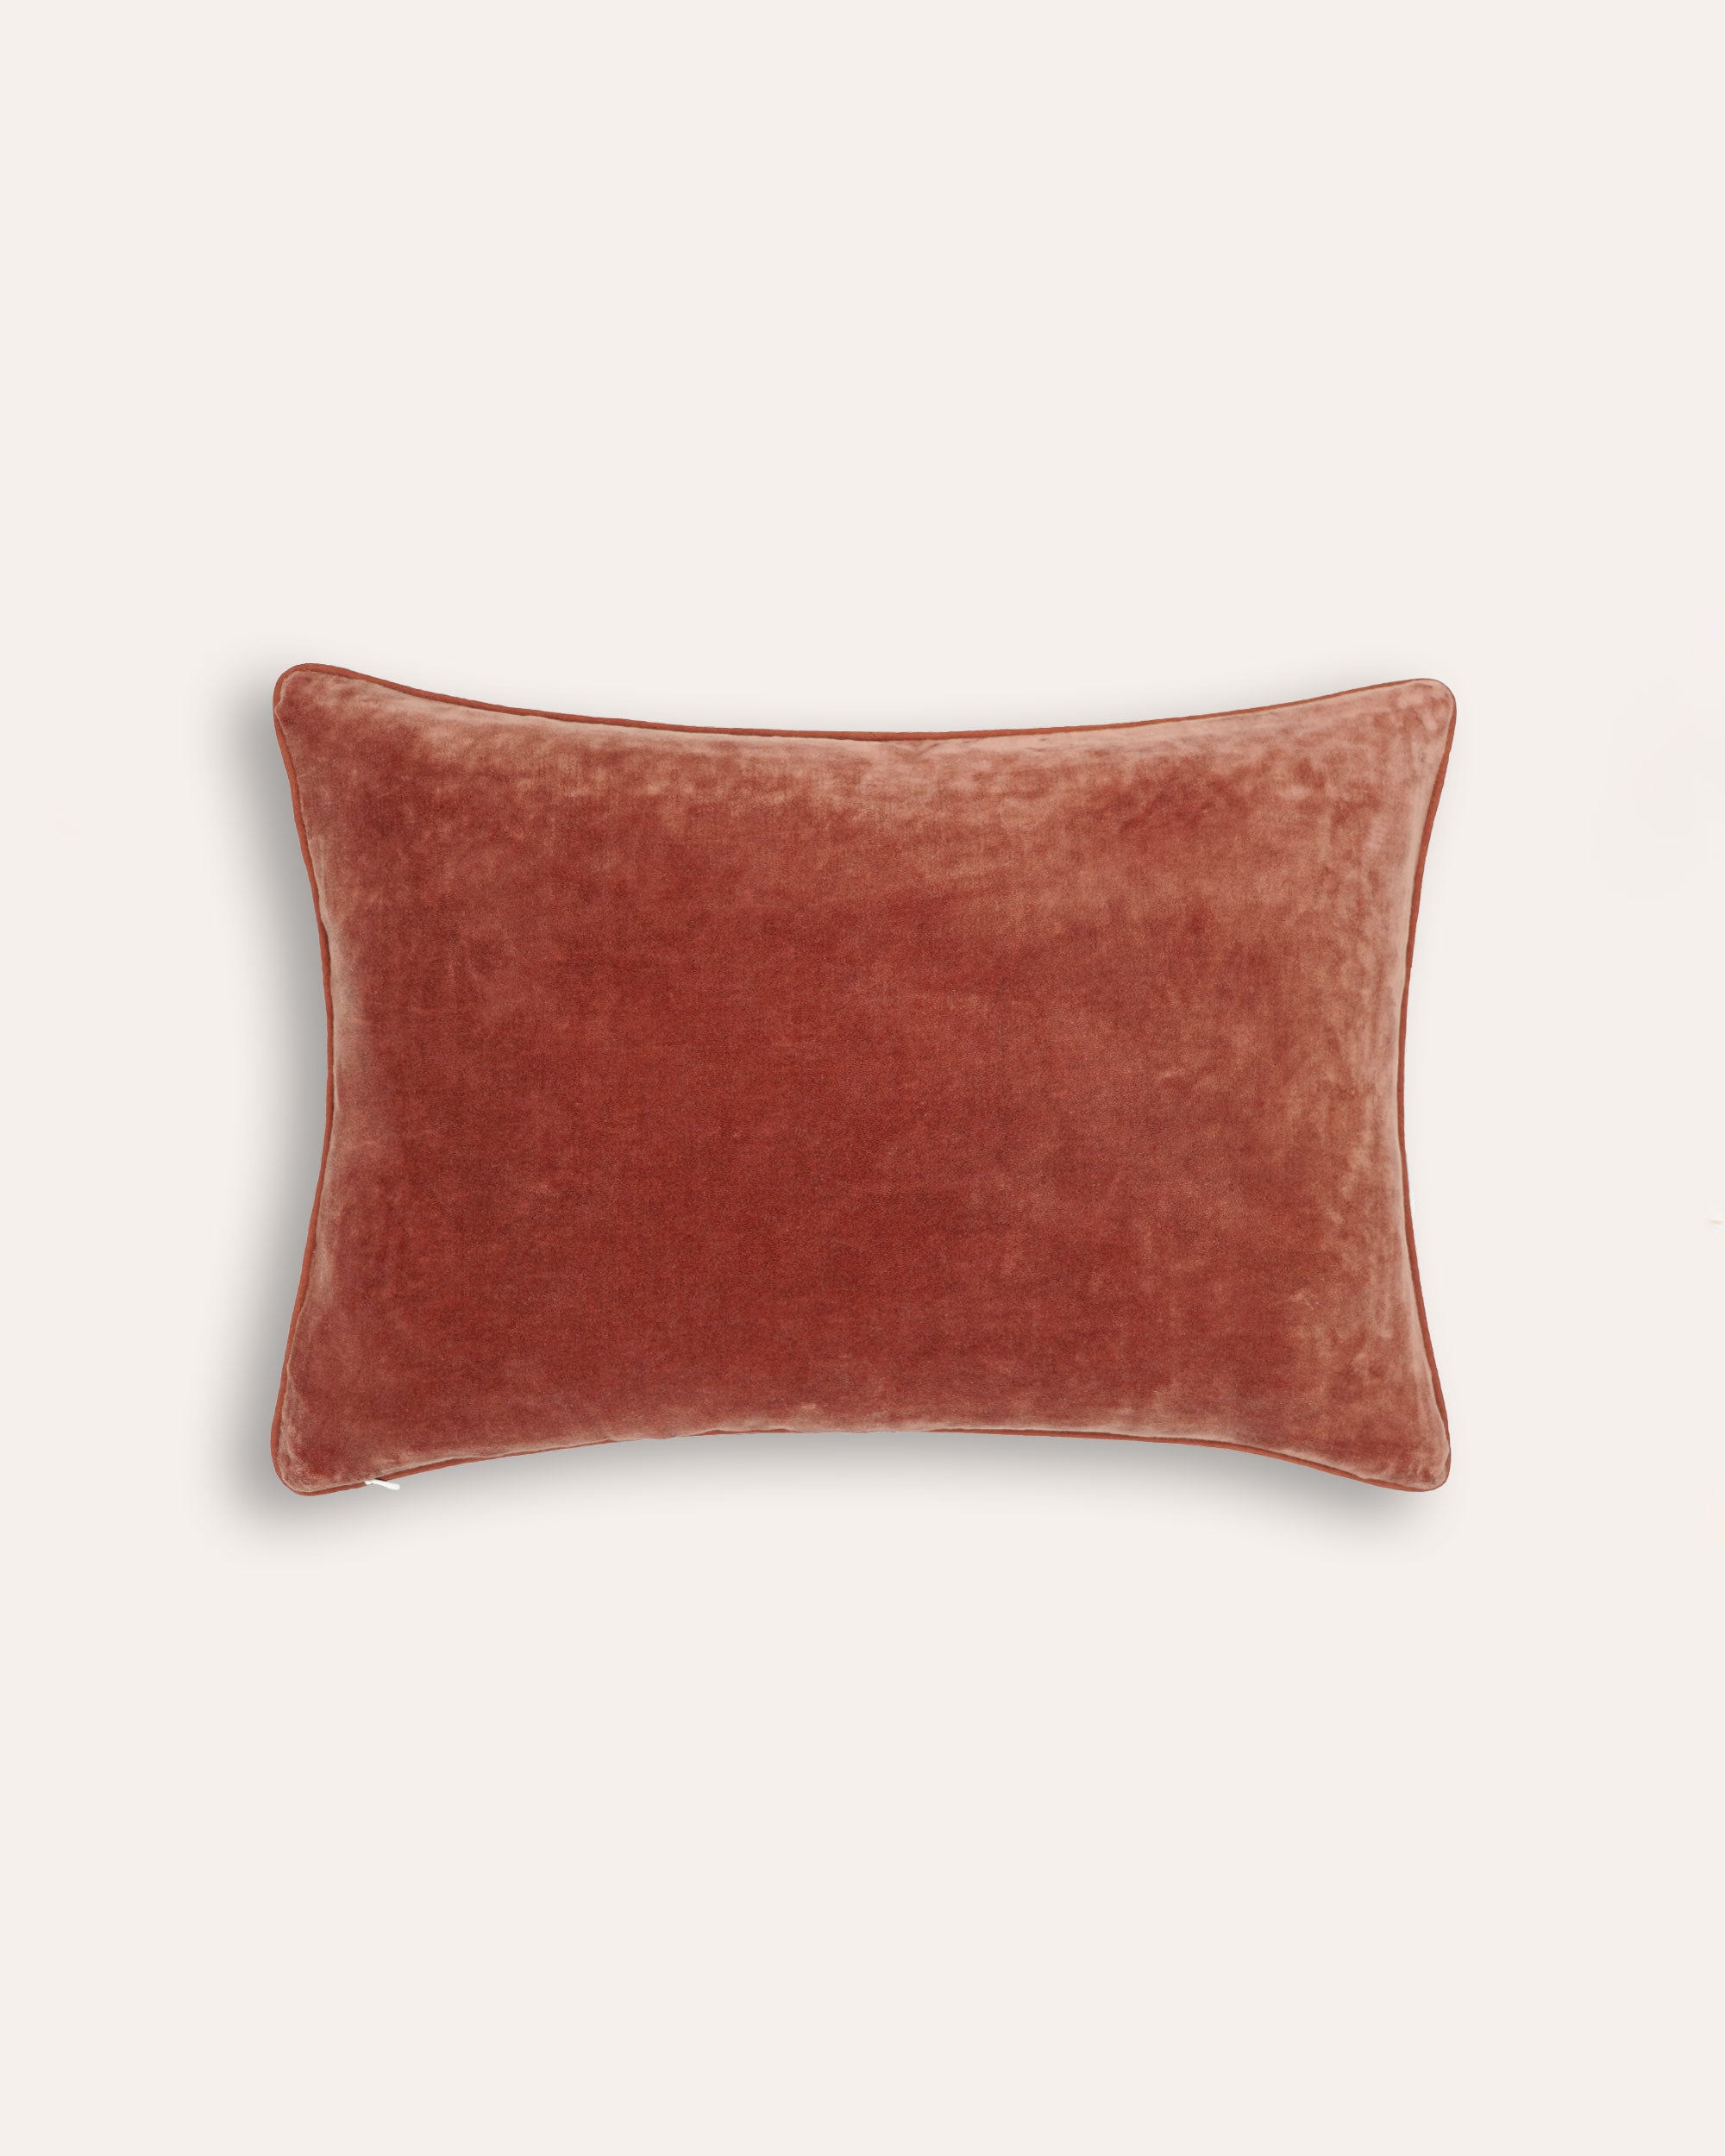 Calcada Embroidered Cushion - Red and Taupe